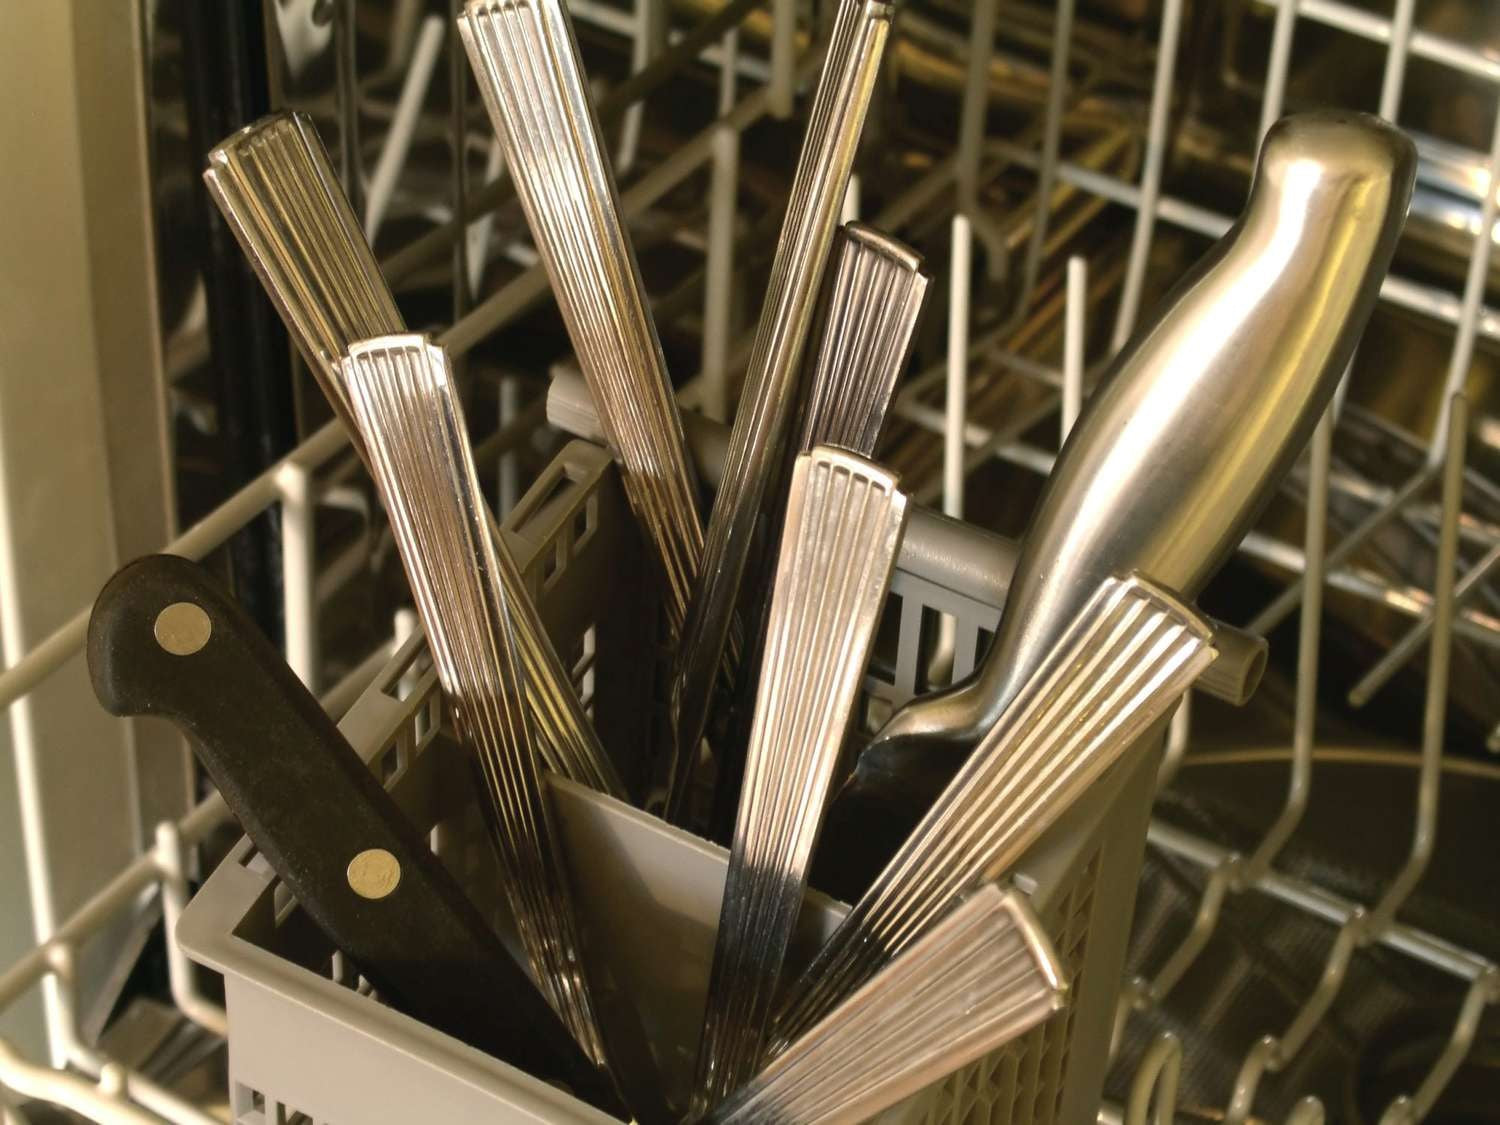 Do Utensils in the dishwasher go up or down?